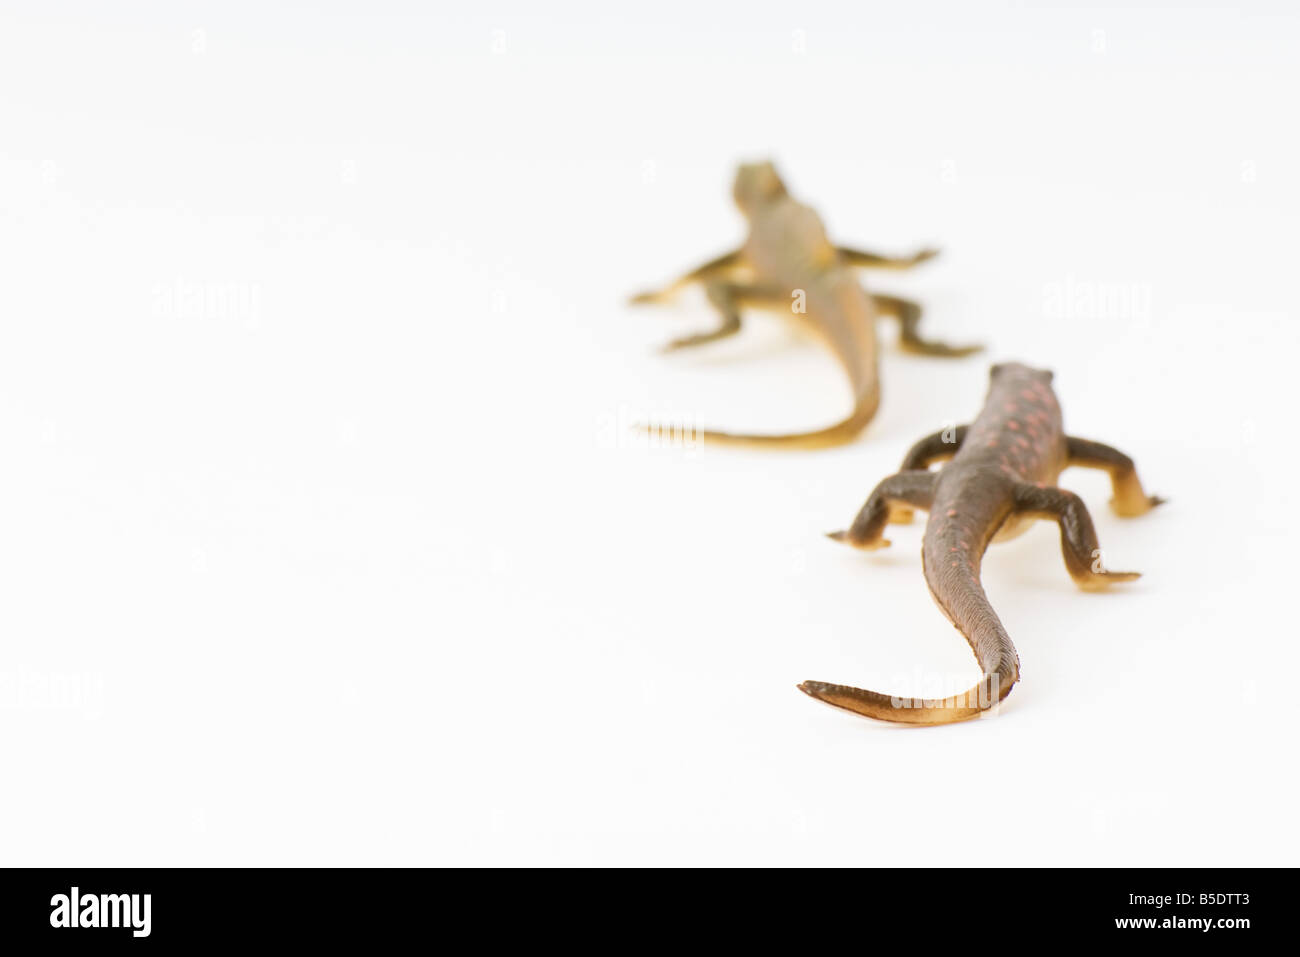 Toy lizards, one following the other, rear view Stock Photo